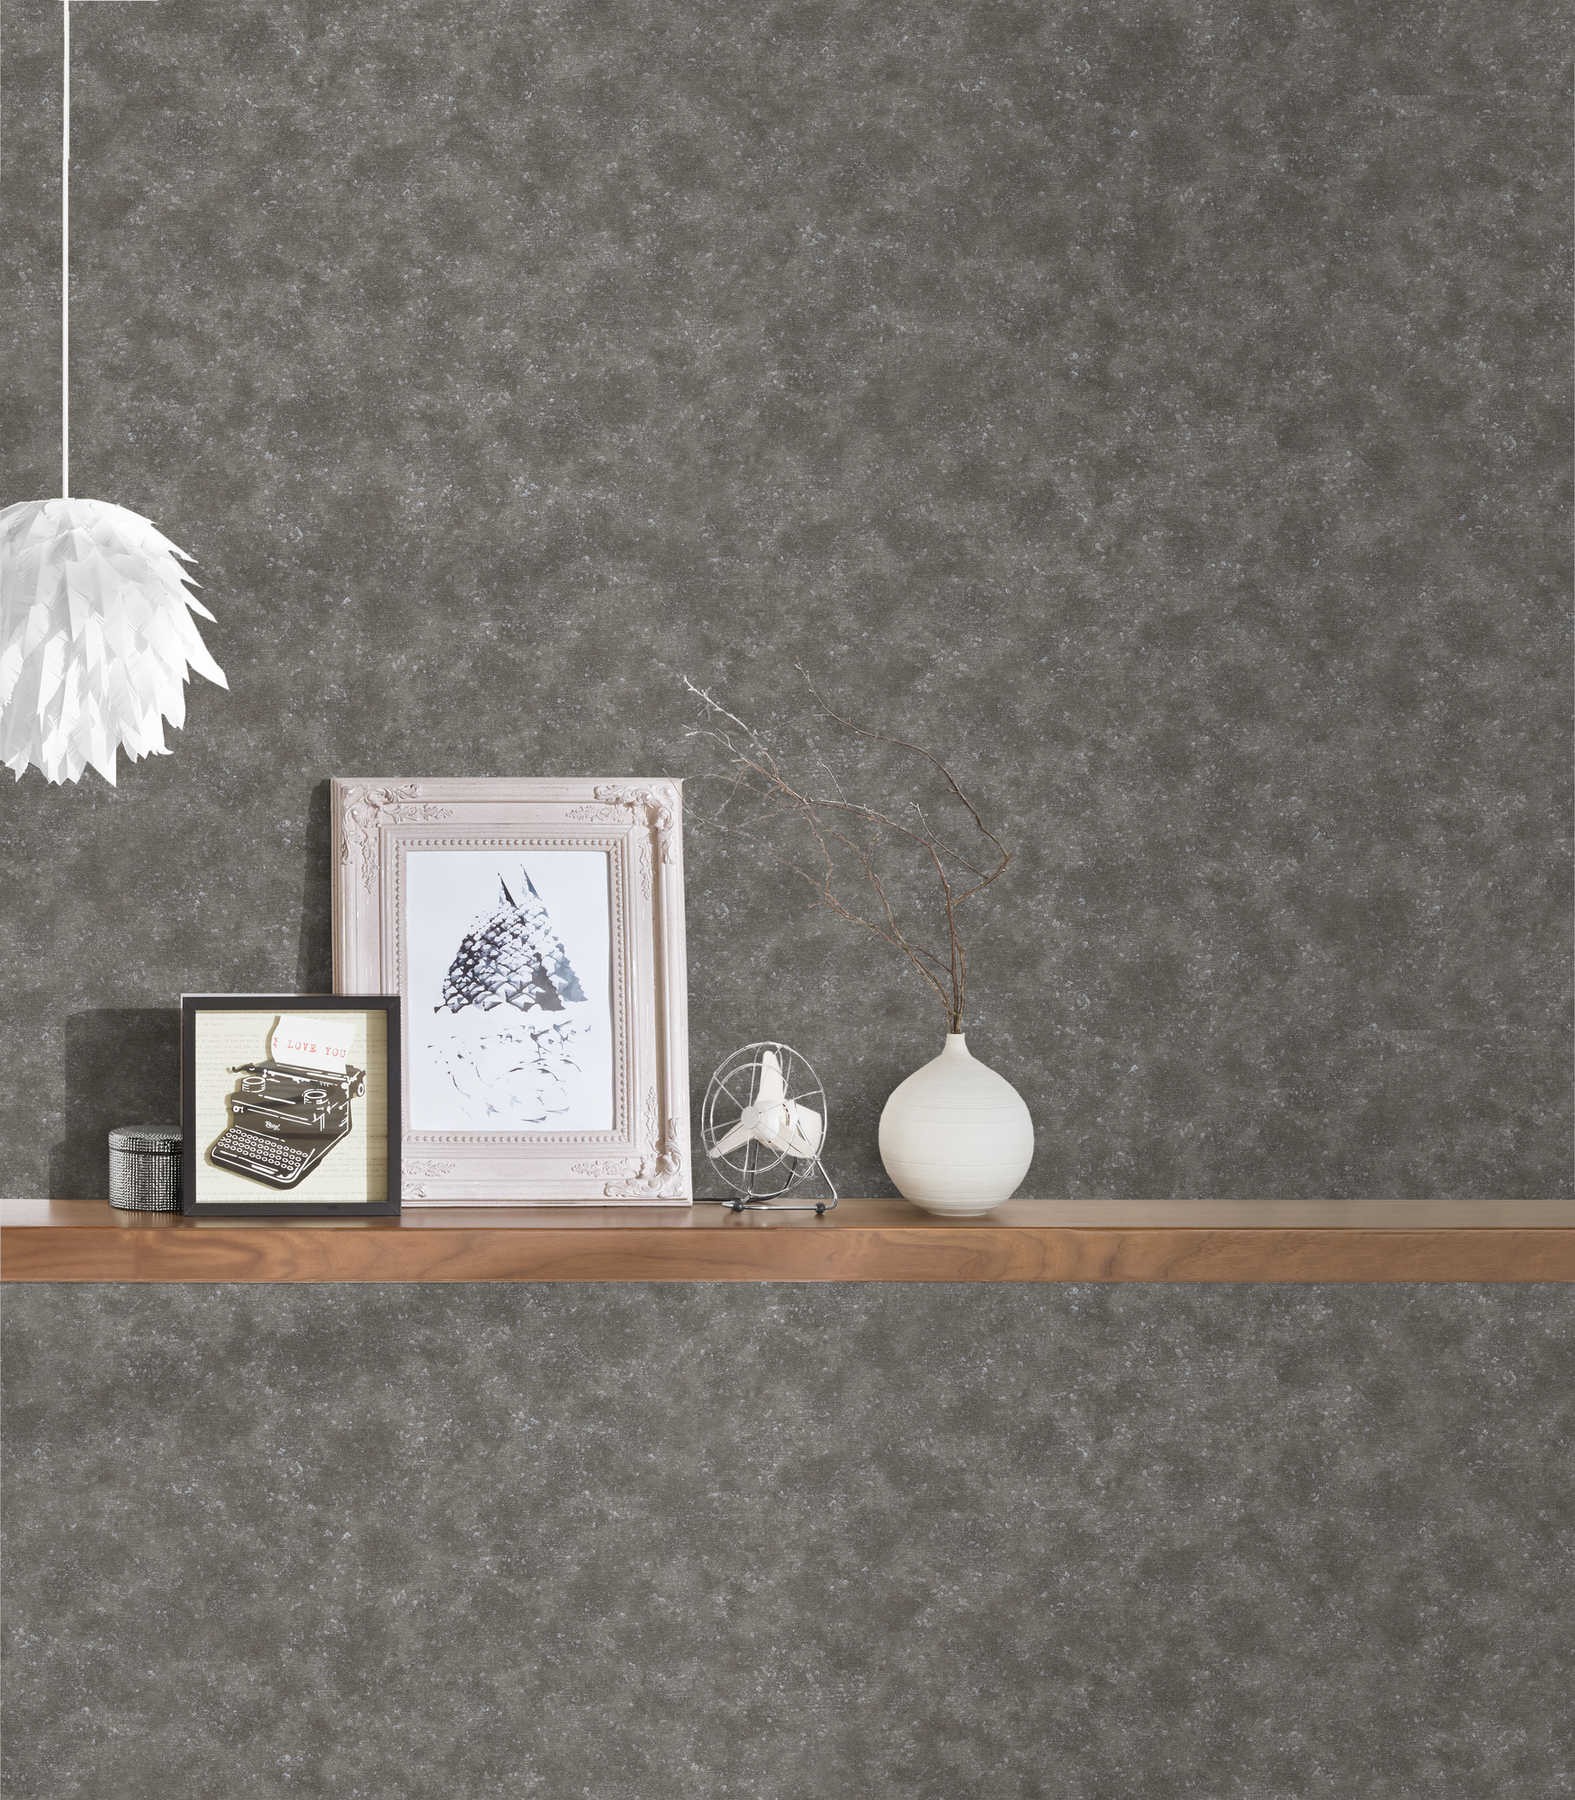             Industrail style wallpaper natural stone grey with texture effect
        